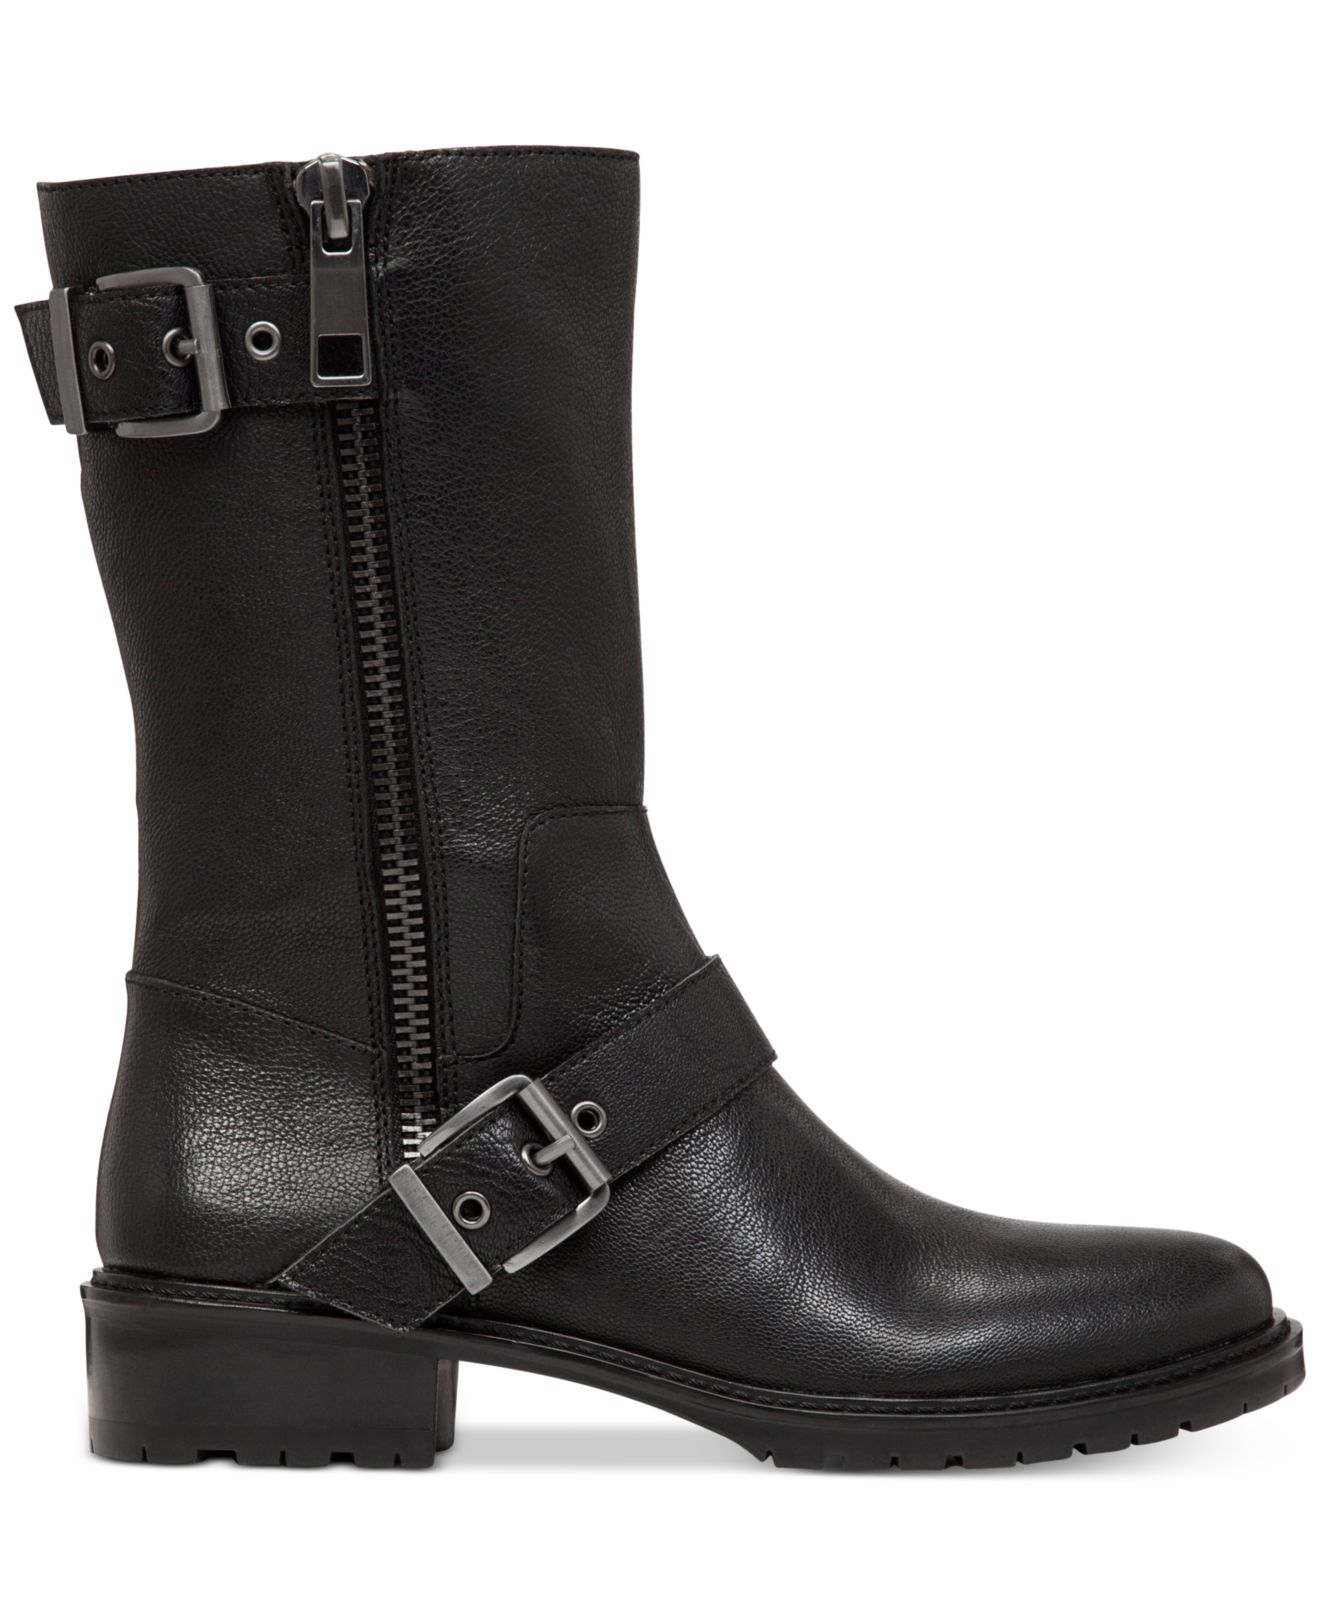 Lyst - Bcbgeneration Santino Mid-calf Booties in Black